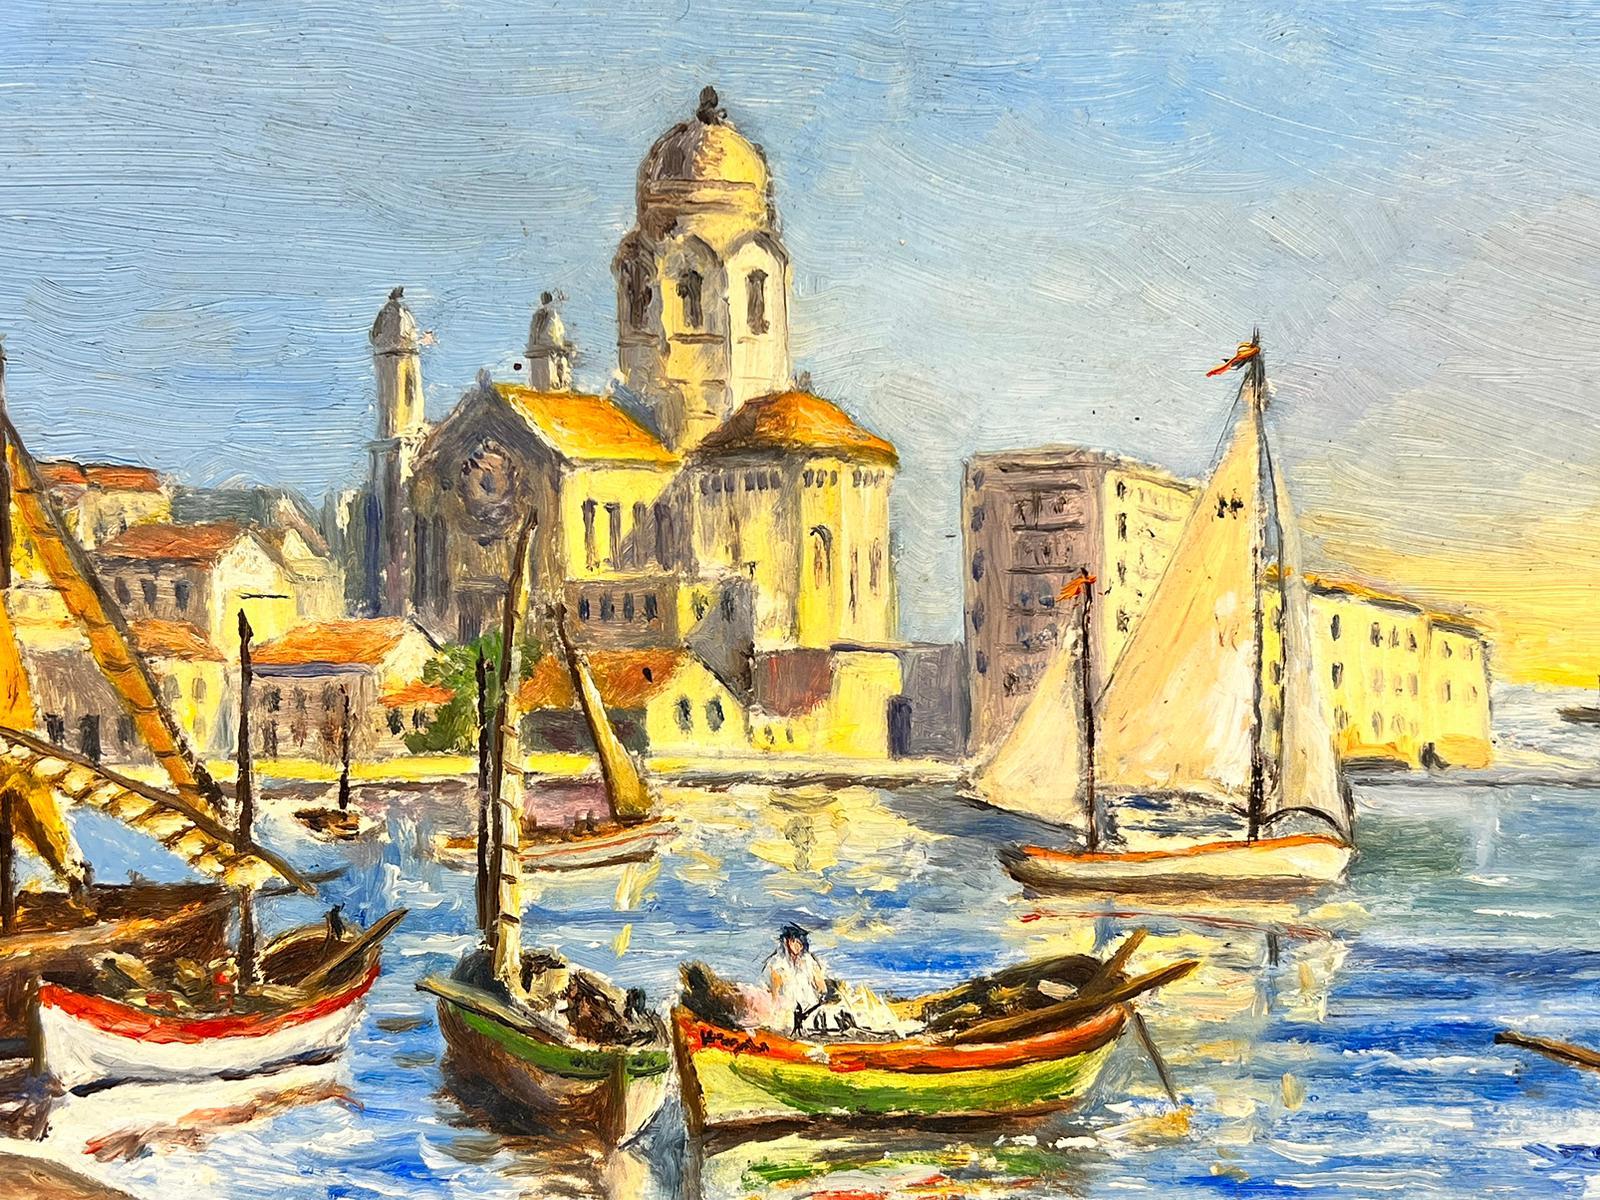 Saint Raphael, south of France 
Mid 20th century 
Signed and inscribed verso
Oil on board, framed
inscribed verso
framed: 9 x 11.5 inches
board: 7 x 9.5 inches
private collection, France
the painting is in overall very good and sound condition